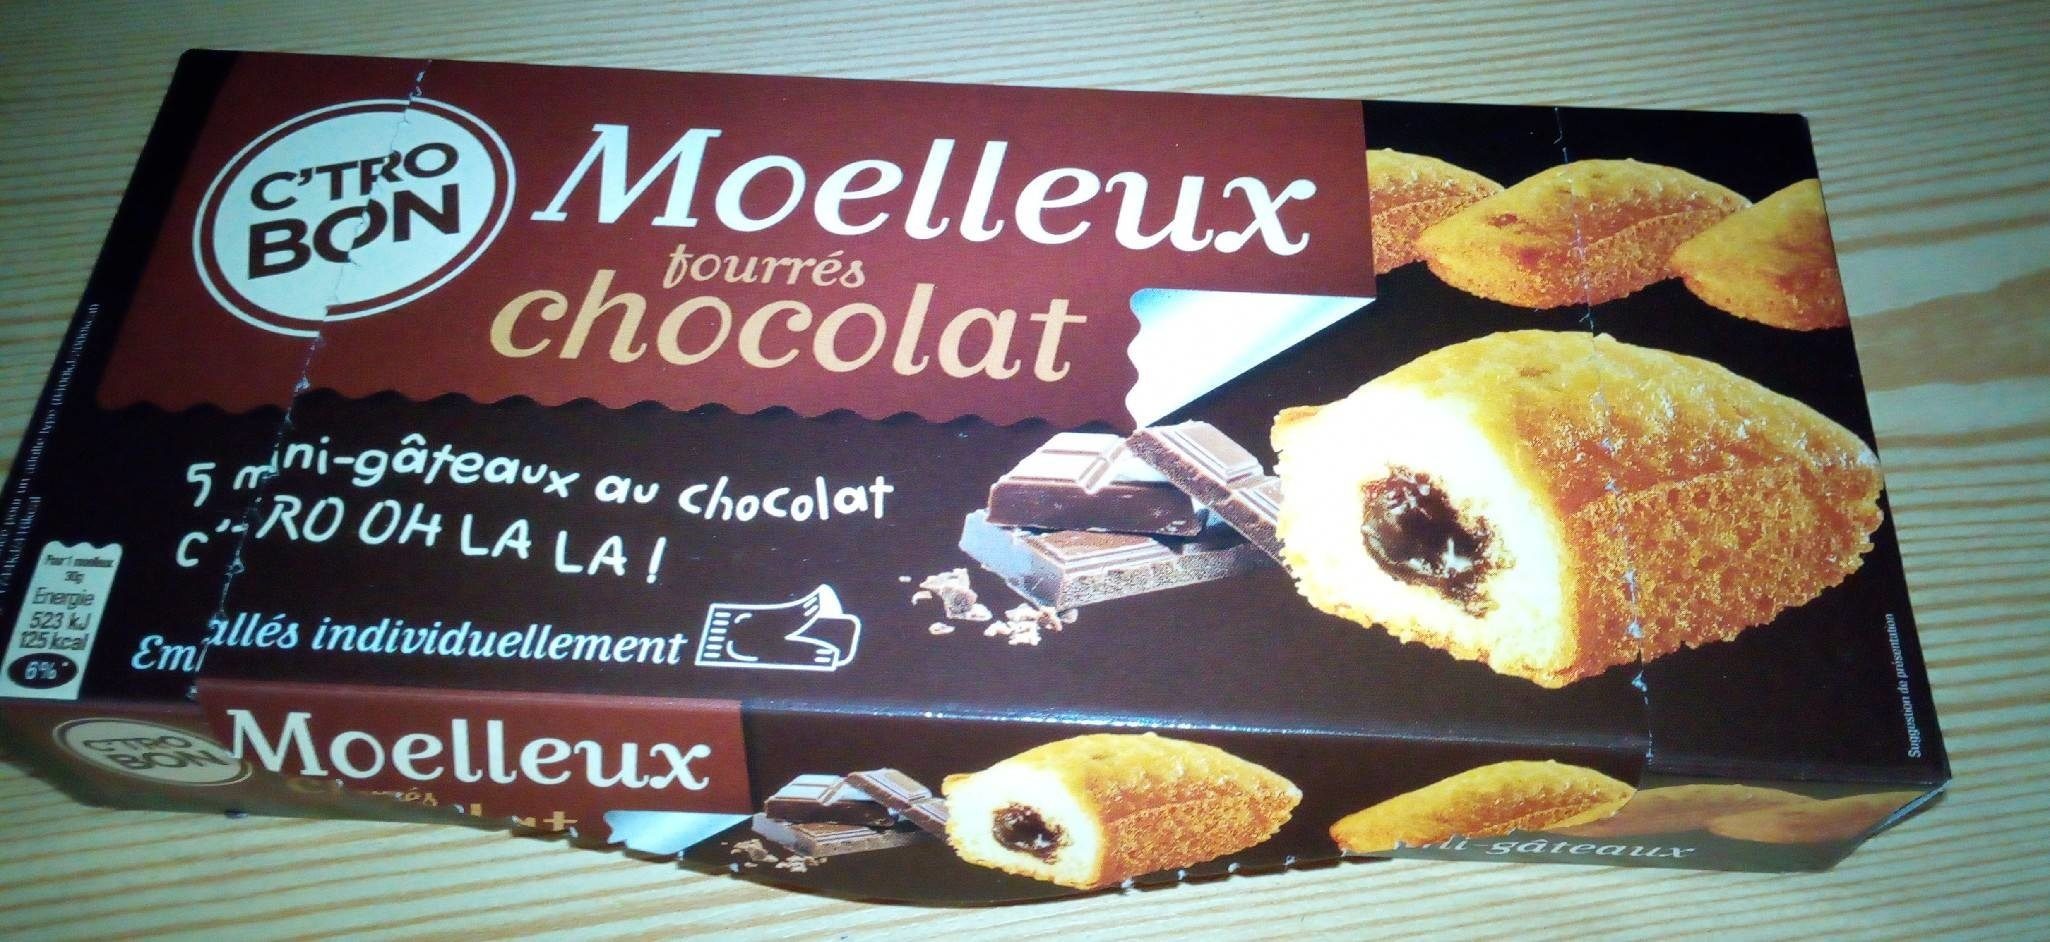 Moelleux chocolat - Product - fr